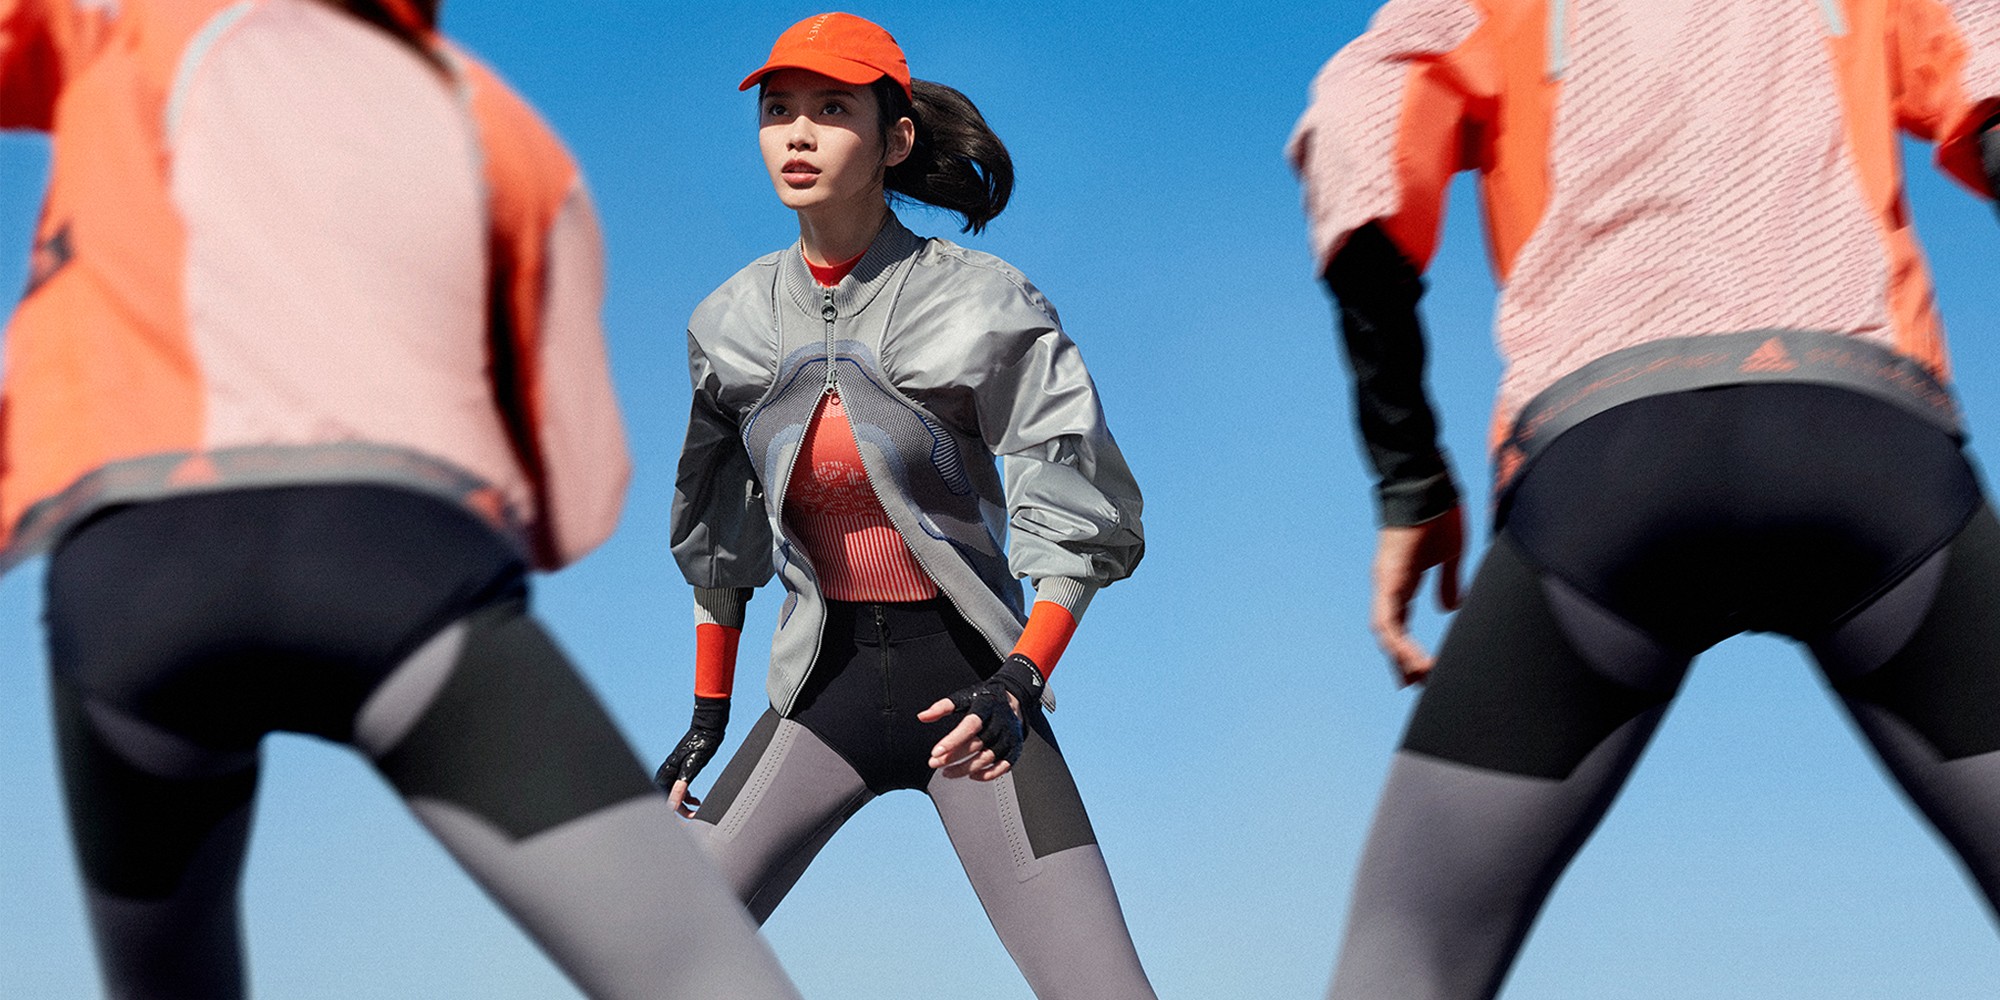 ADIDAS BY STELLA MCCARTNEY SPRING 2019 COLLECTION